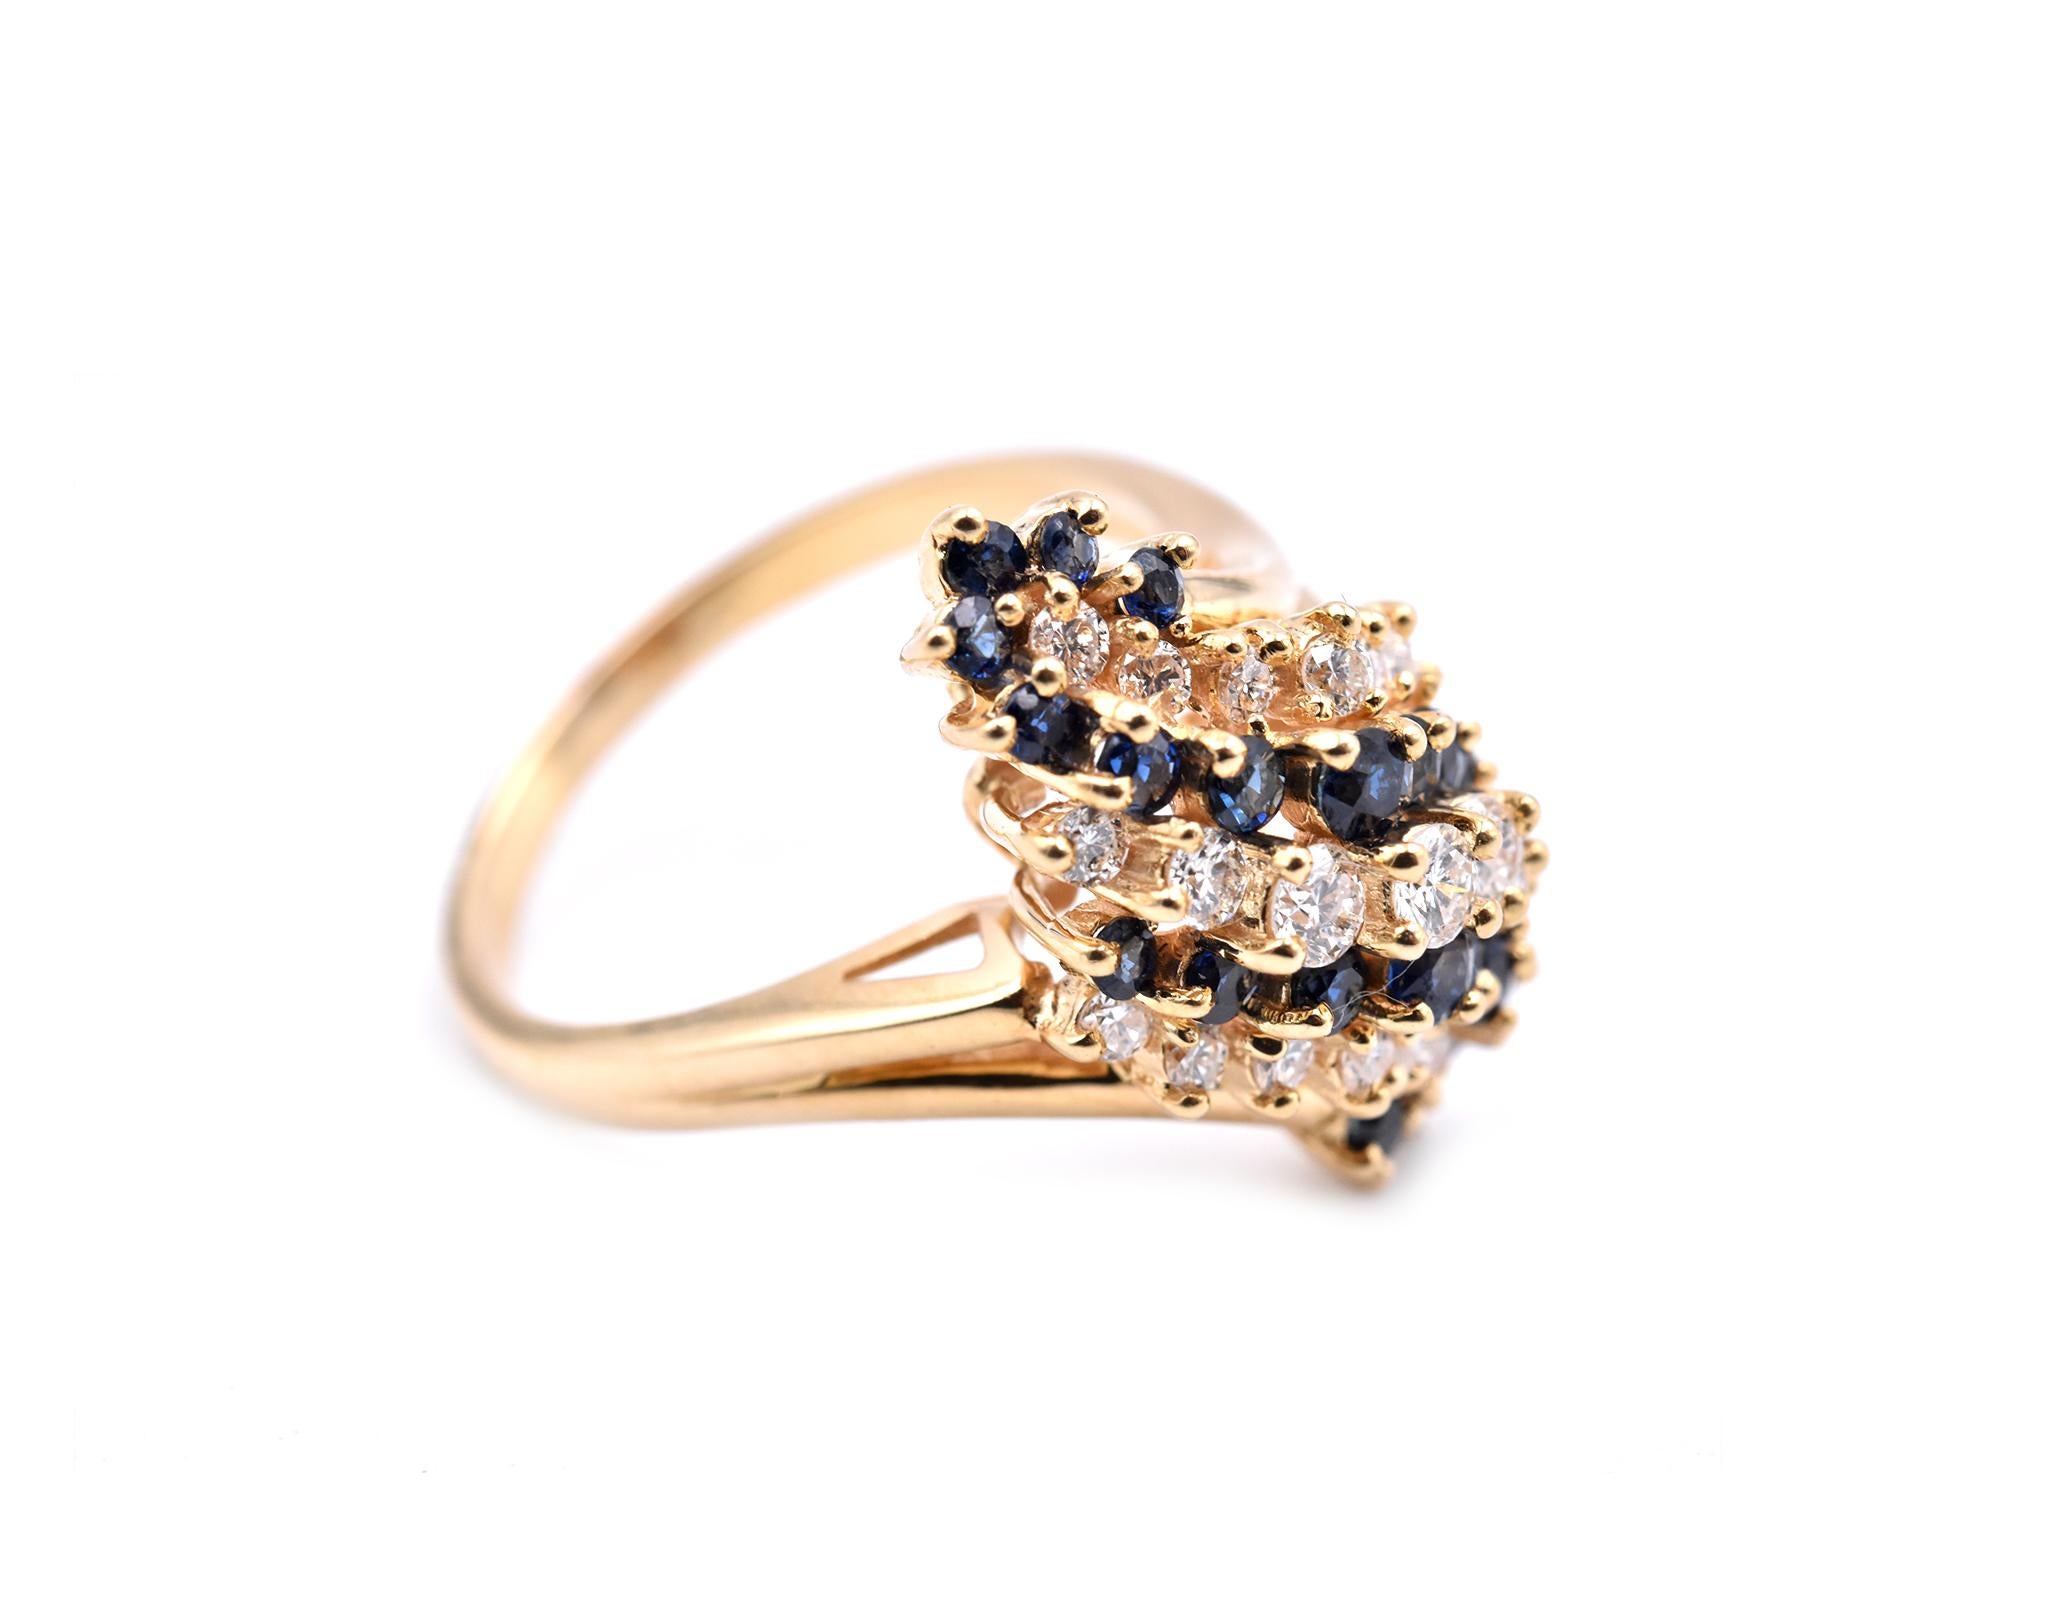 Designer: custom design
Material: 18k yellow gold
Sapphire: sapphires = .50cttw
Diamonds: 21 round brilliant cut = 0.80cttw
Color: G
Clarity: VS
Ring size: 7 ½ please allow two additional shipping days for sizing requests) 
Dimensions: ring top is